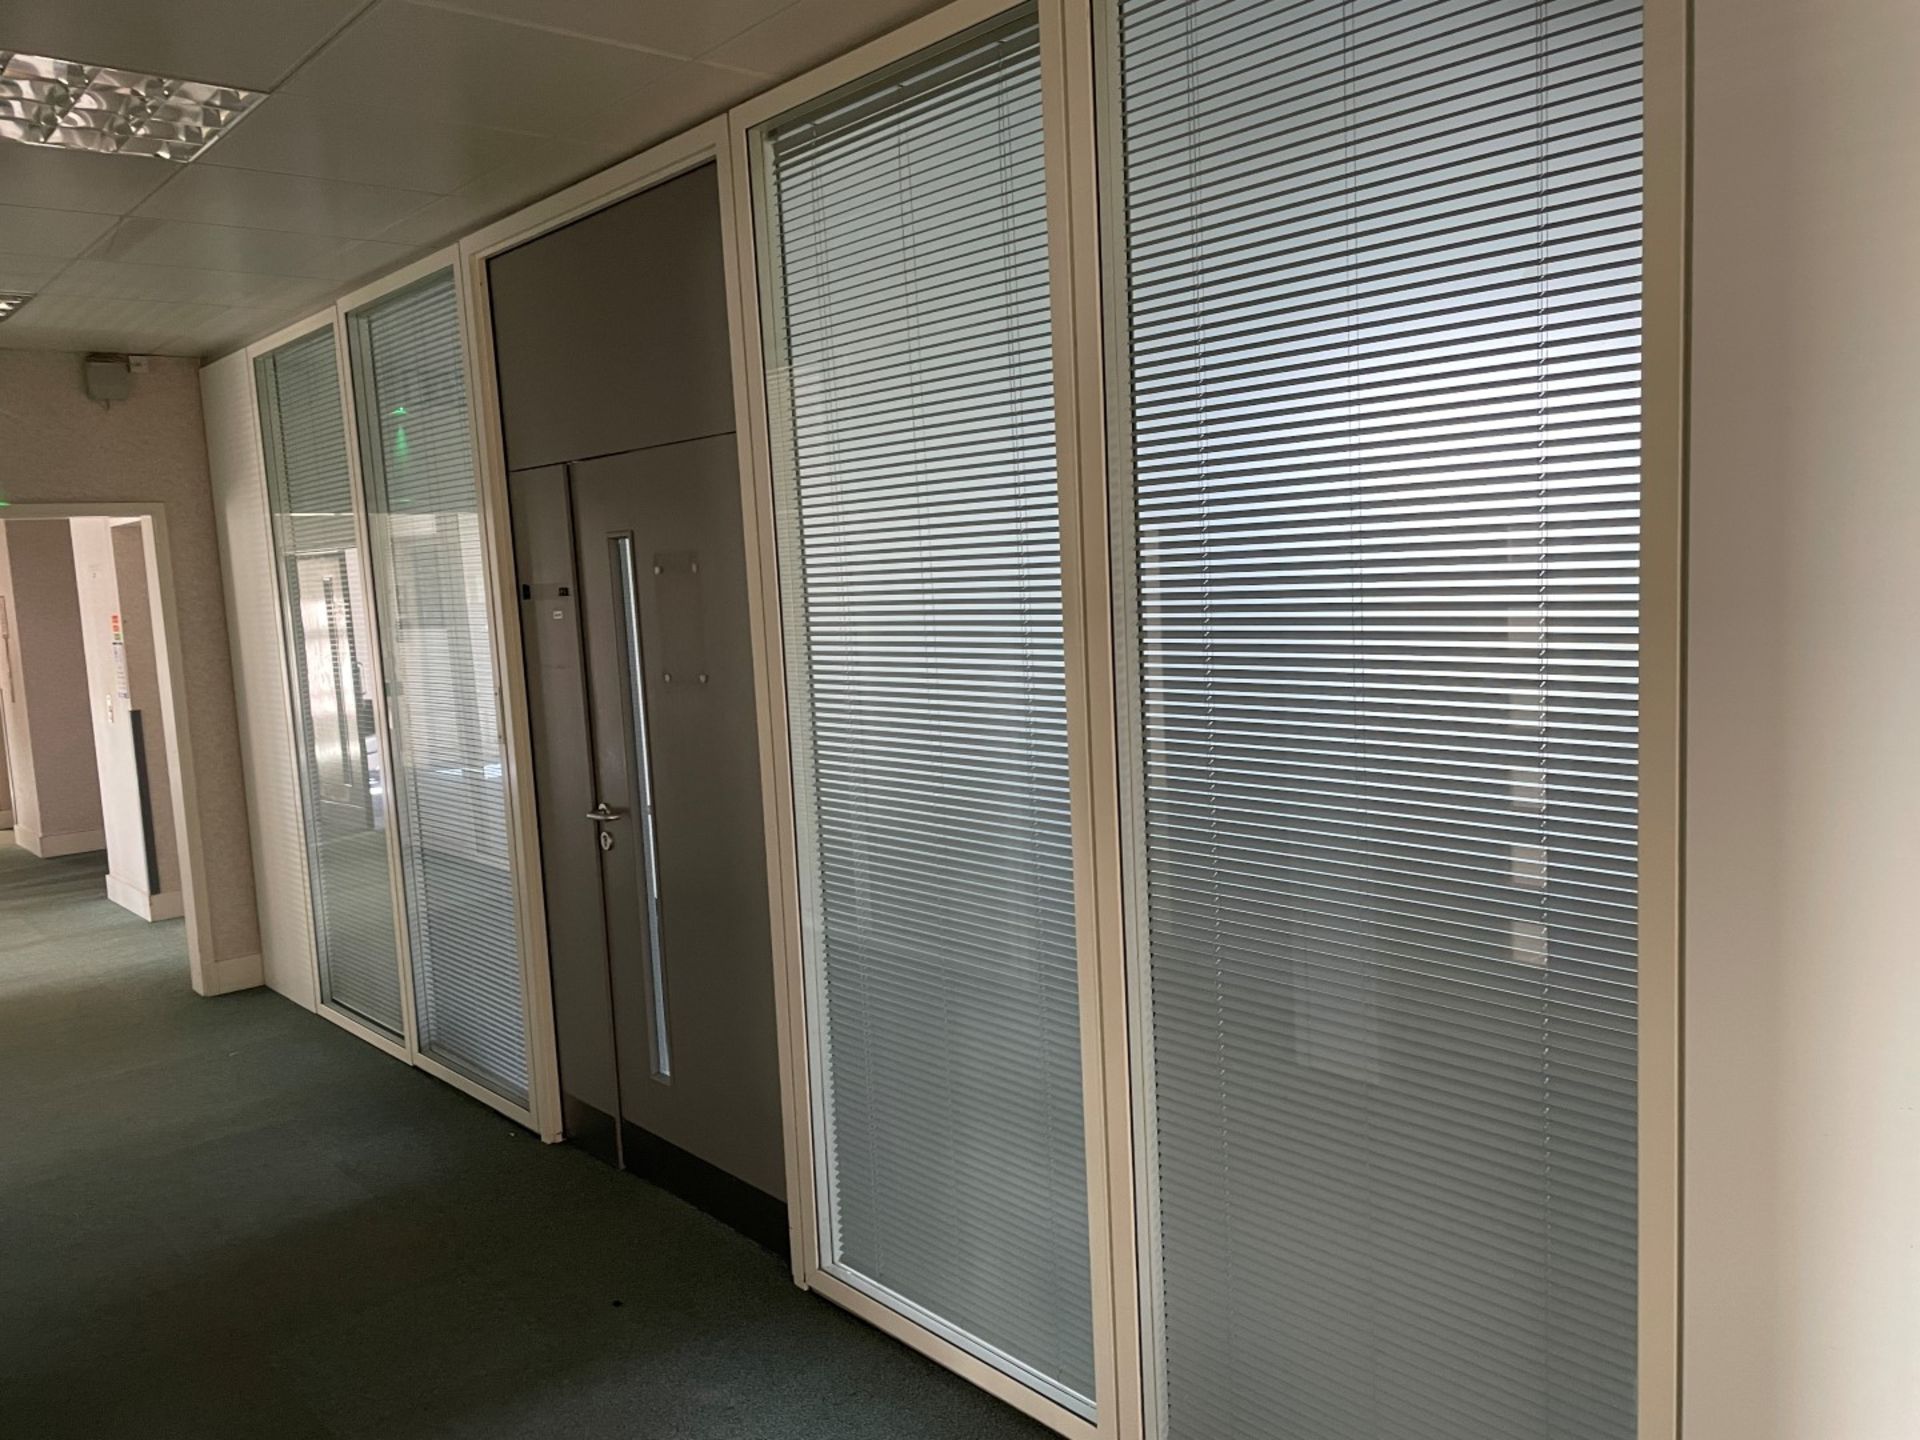 6 x Partition Panels - Includes 4 x Glazed With Privacy Blinds And 2 x Slim Solid White Panels -